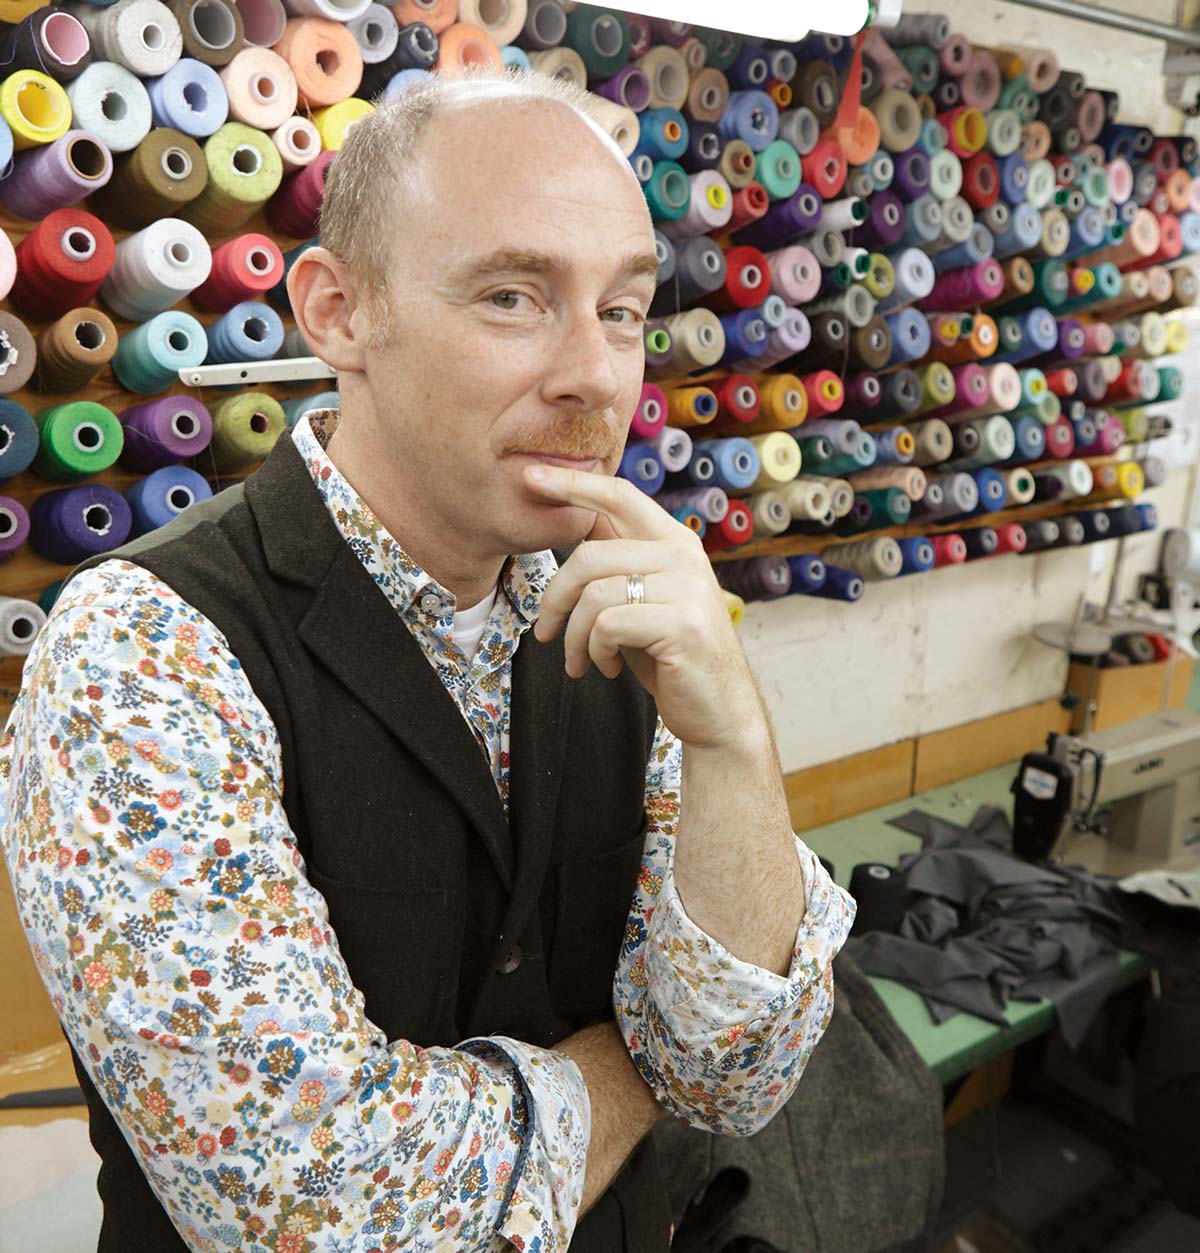 Alexander Joseph stands by a sewing machine, with spools of colorful thread behind him.